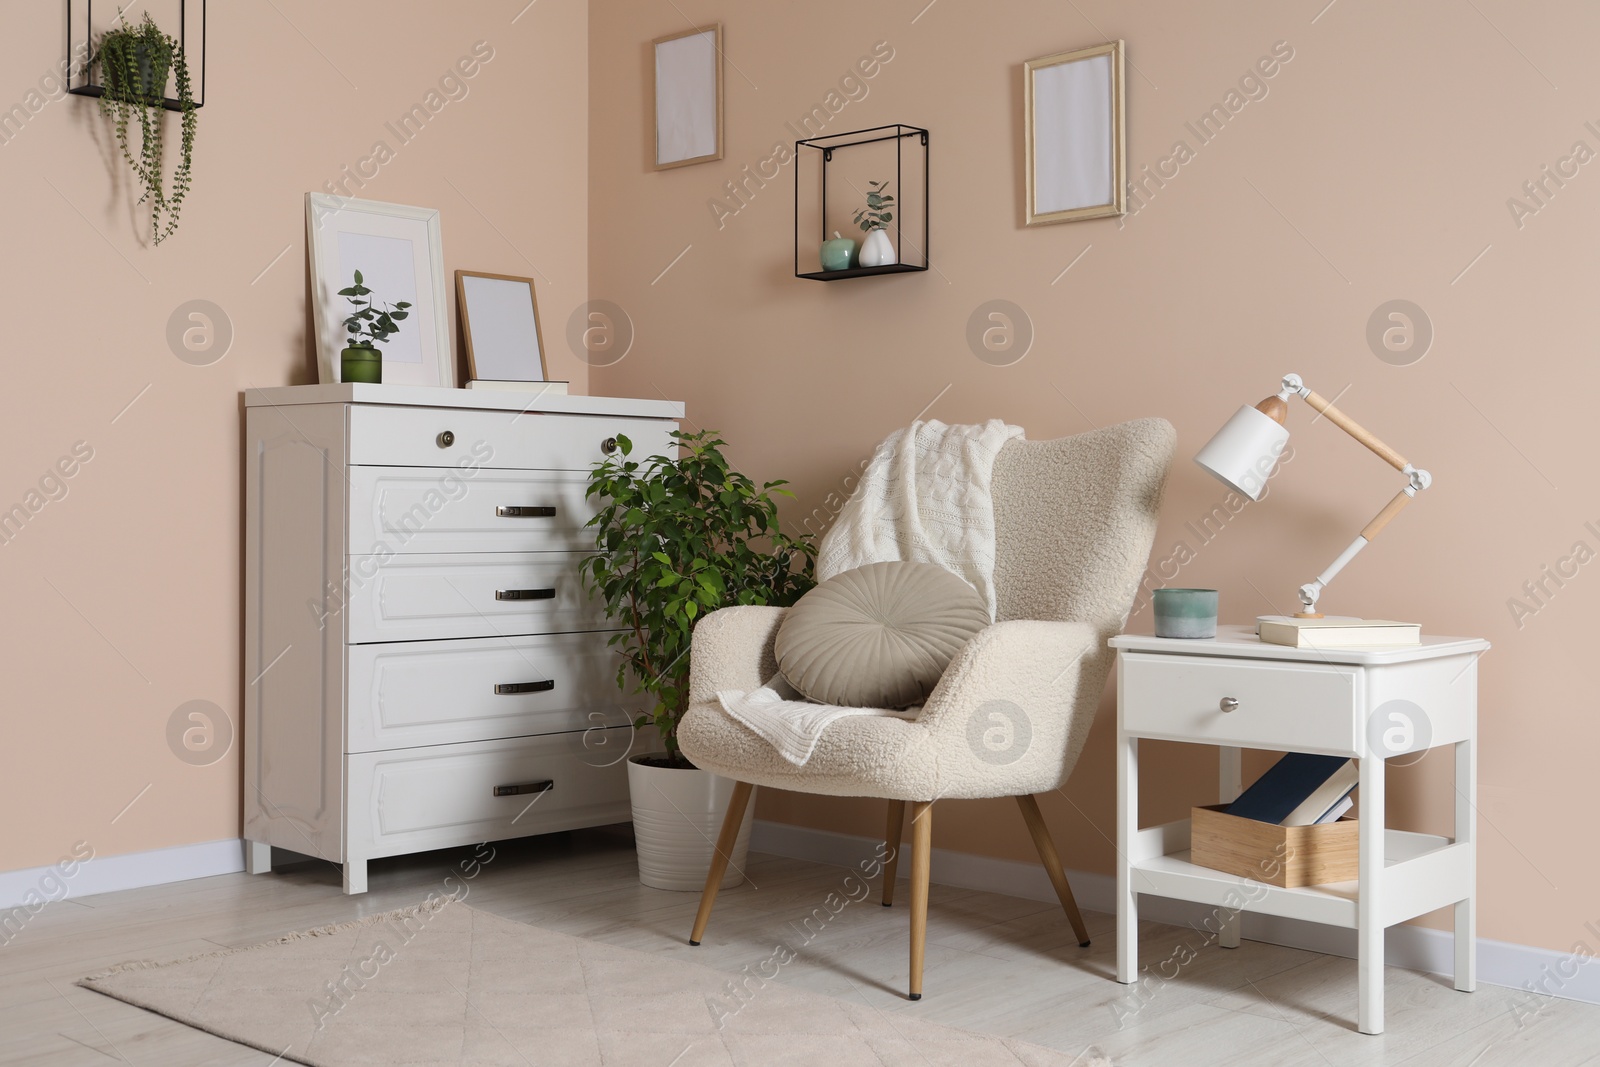 Photo of Cozy room interior with stylish white furniture, desk lamp and beautiful decor elements